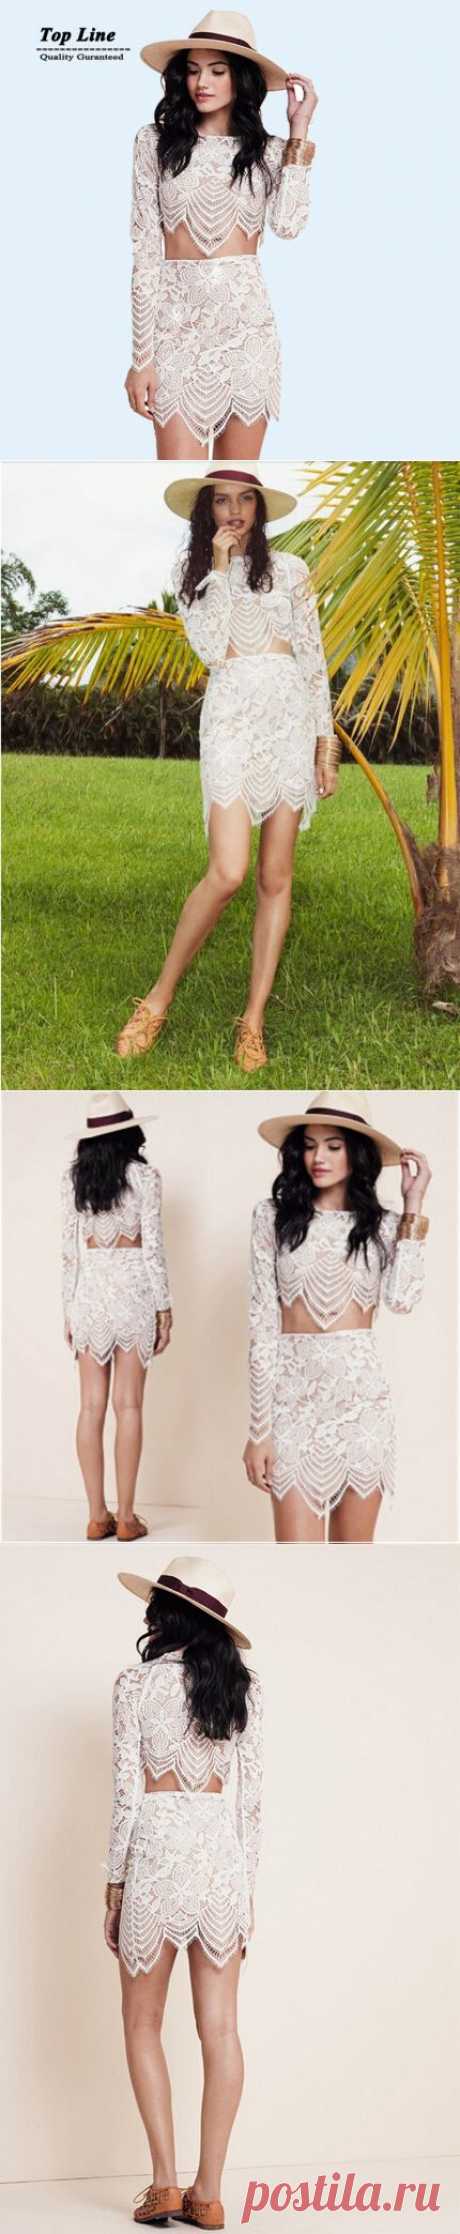 Dresses Picture - More Detailed Picture about Best selling sexy elegant lady crop top dress women lace set dress white two piece lace dress long sleeve high waist outfit Picture in Dresses from Top Line Fashion Costume Co., Ltd | Aliexpress.com | Alibaba Group